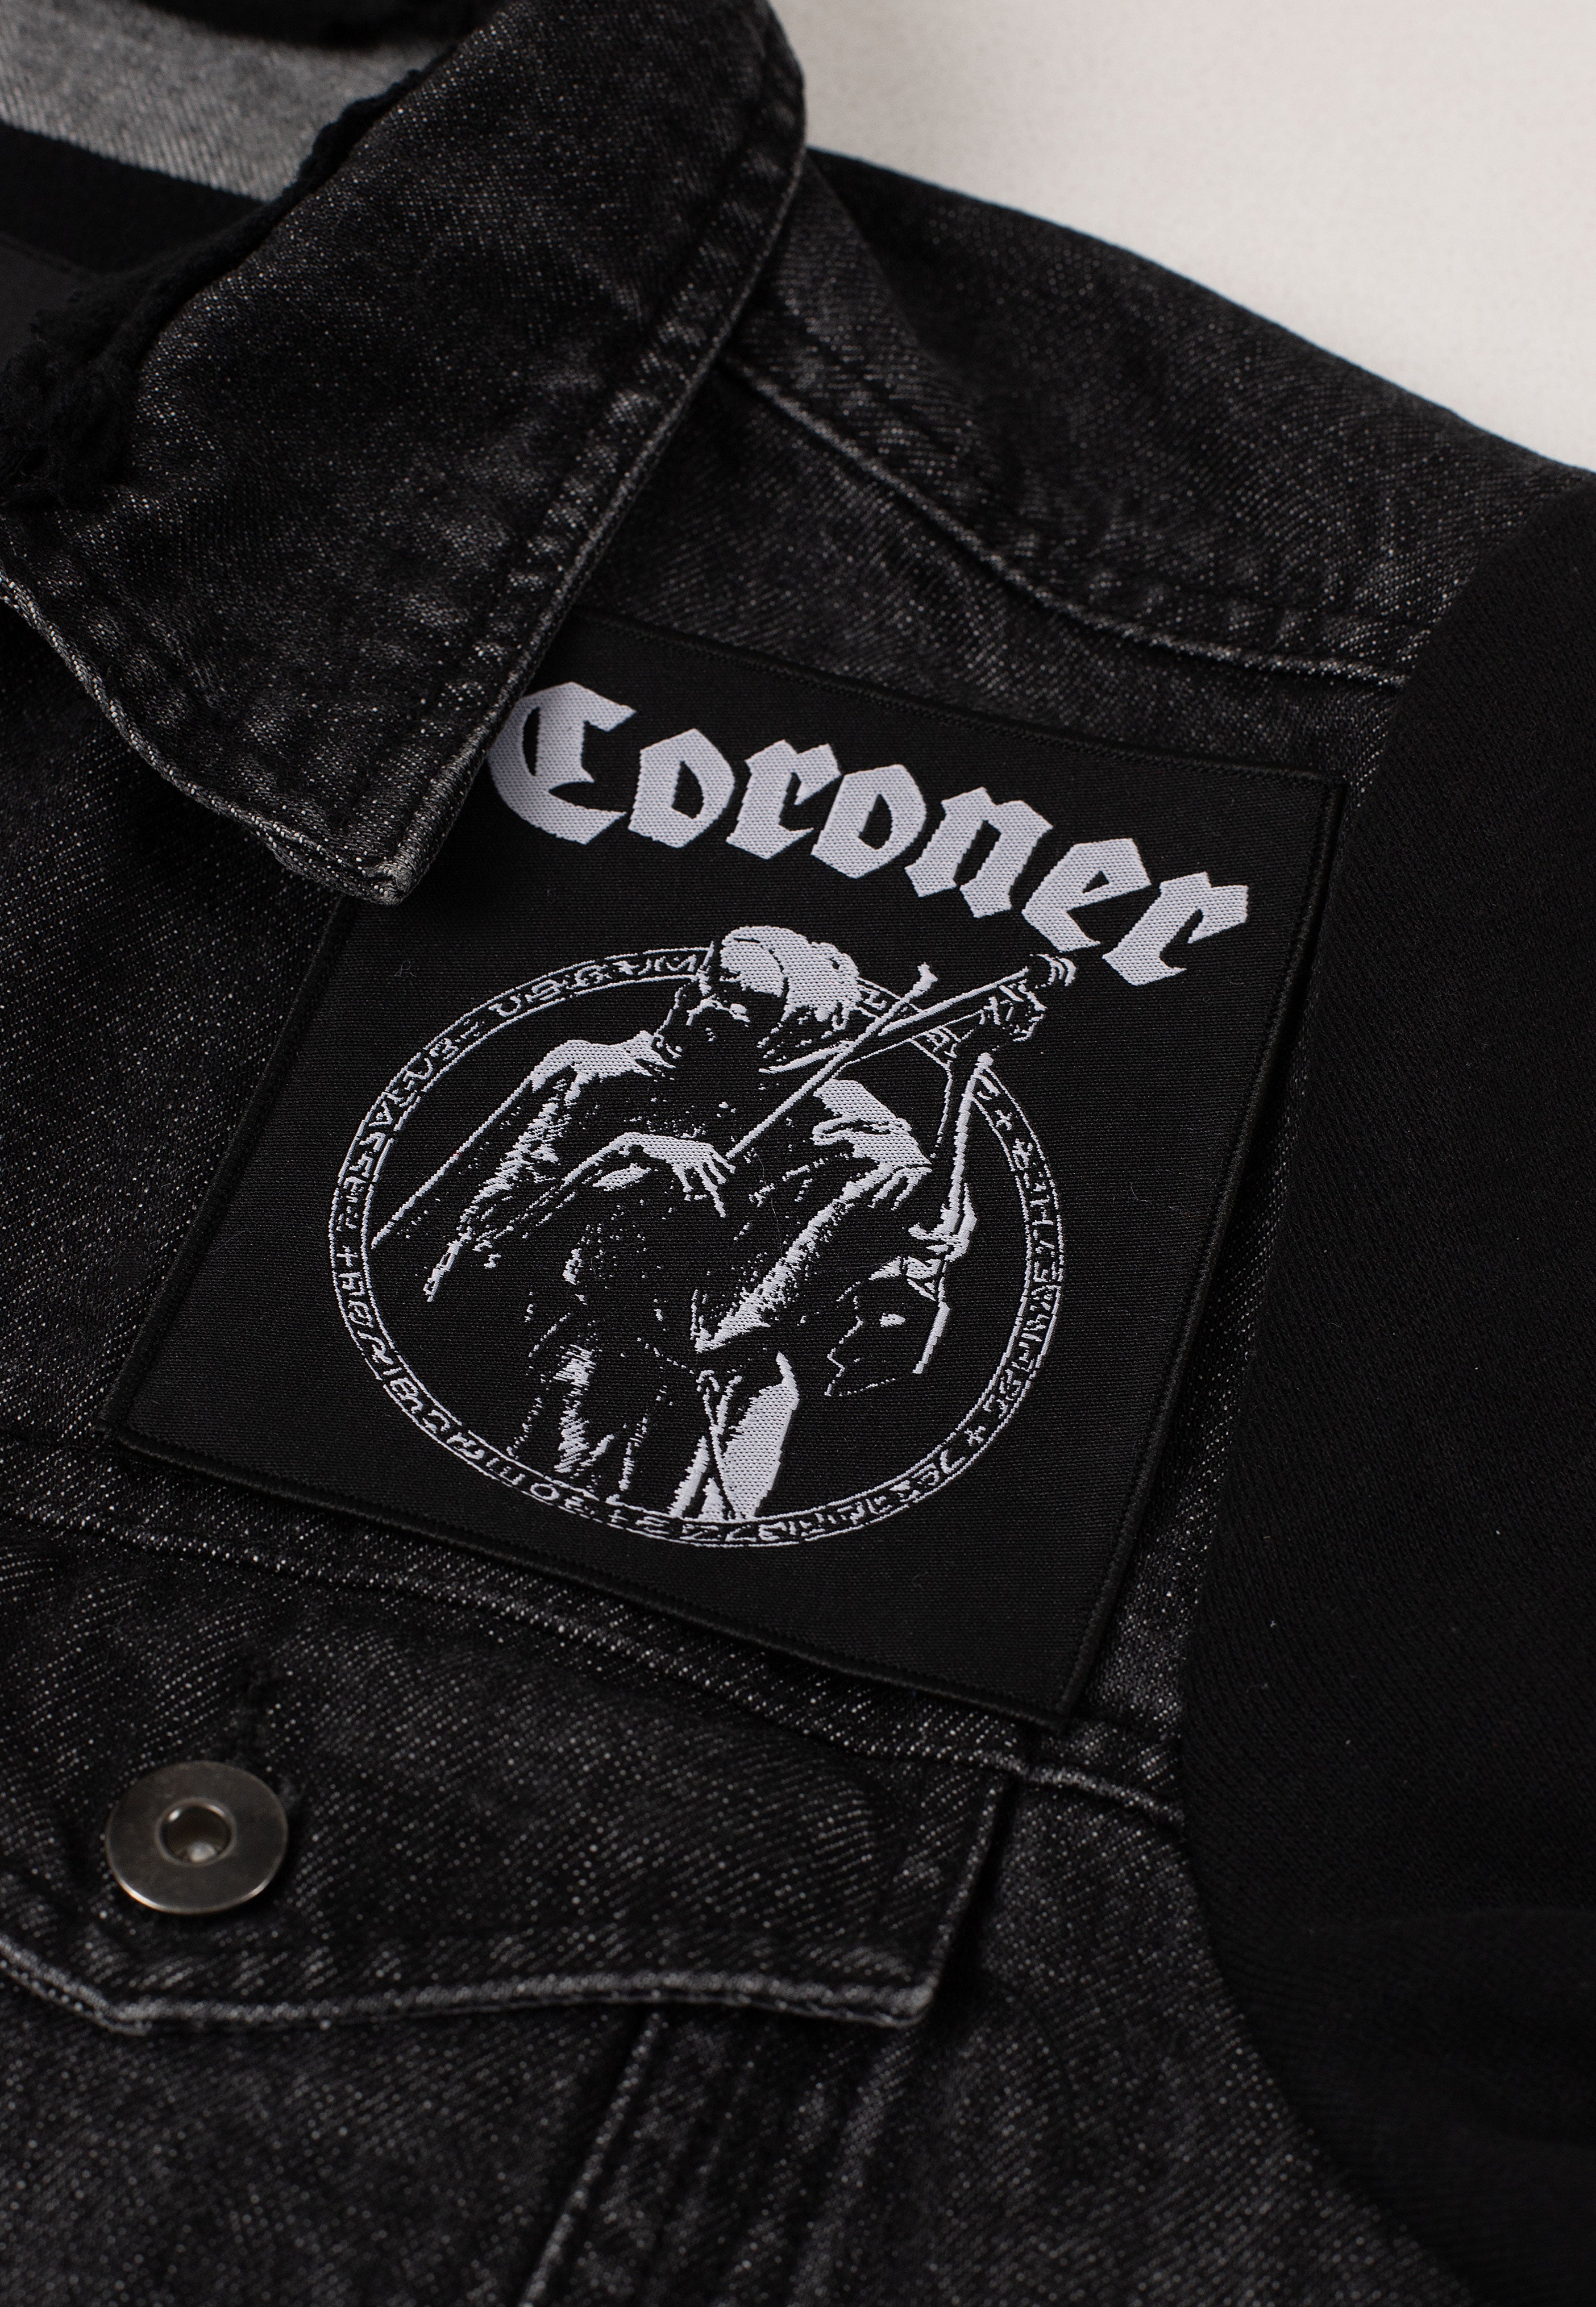 Coroner - Punishment For Decadence - Patch